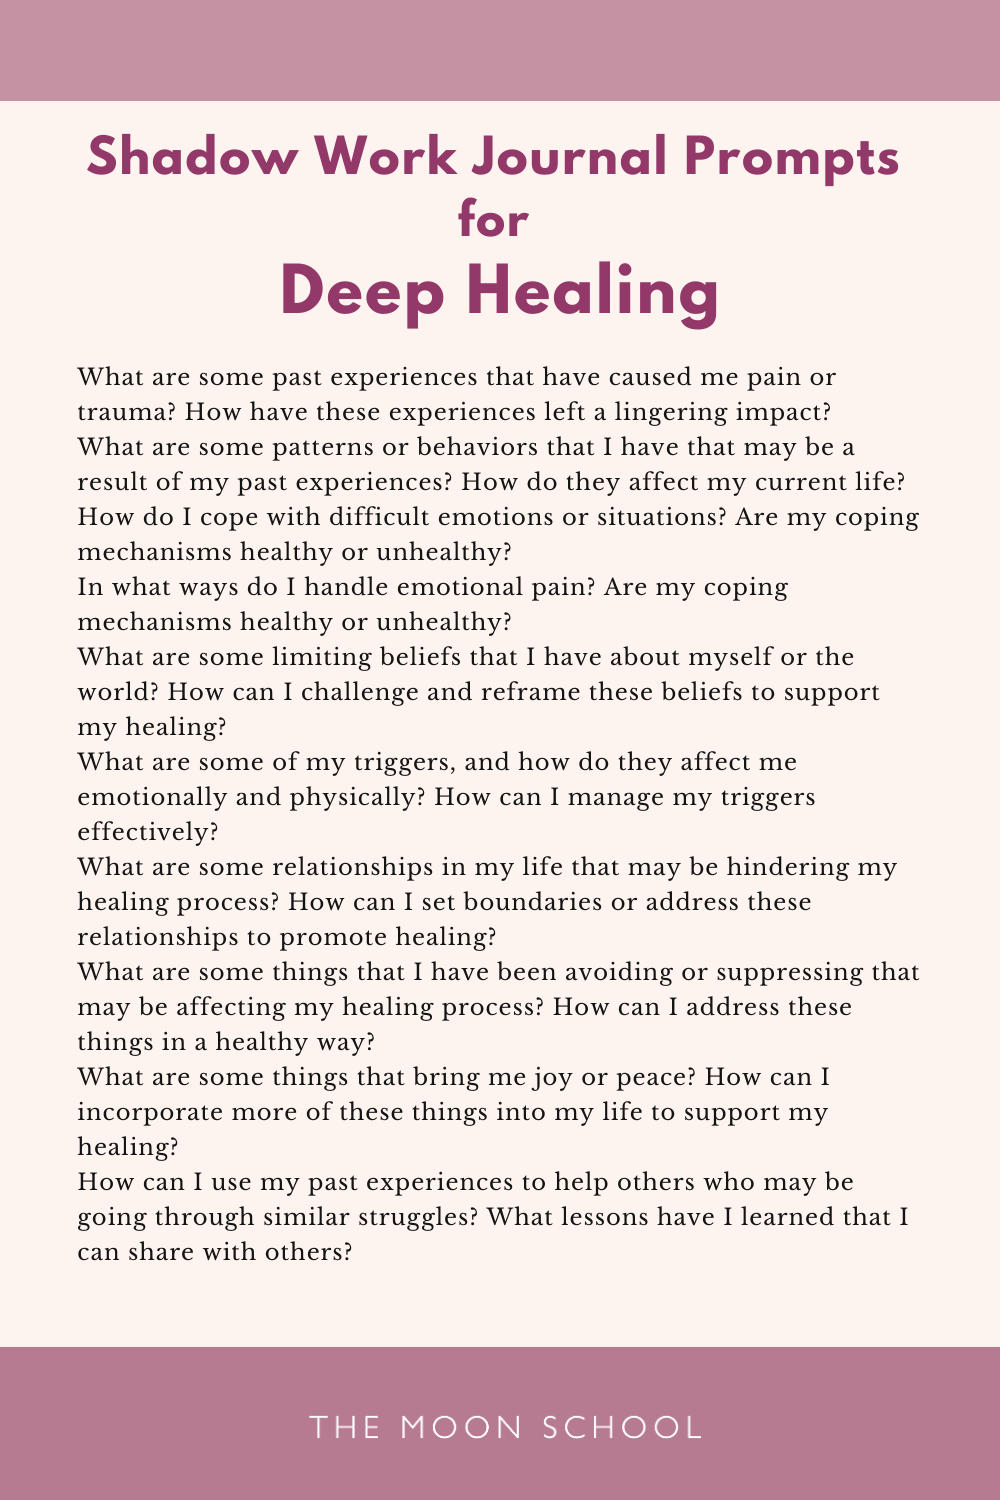 List of 10 free Journal Prompts for deep healing